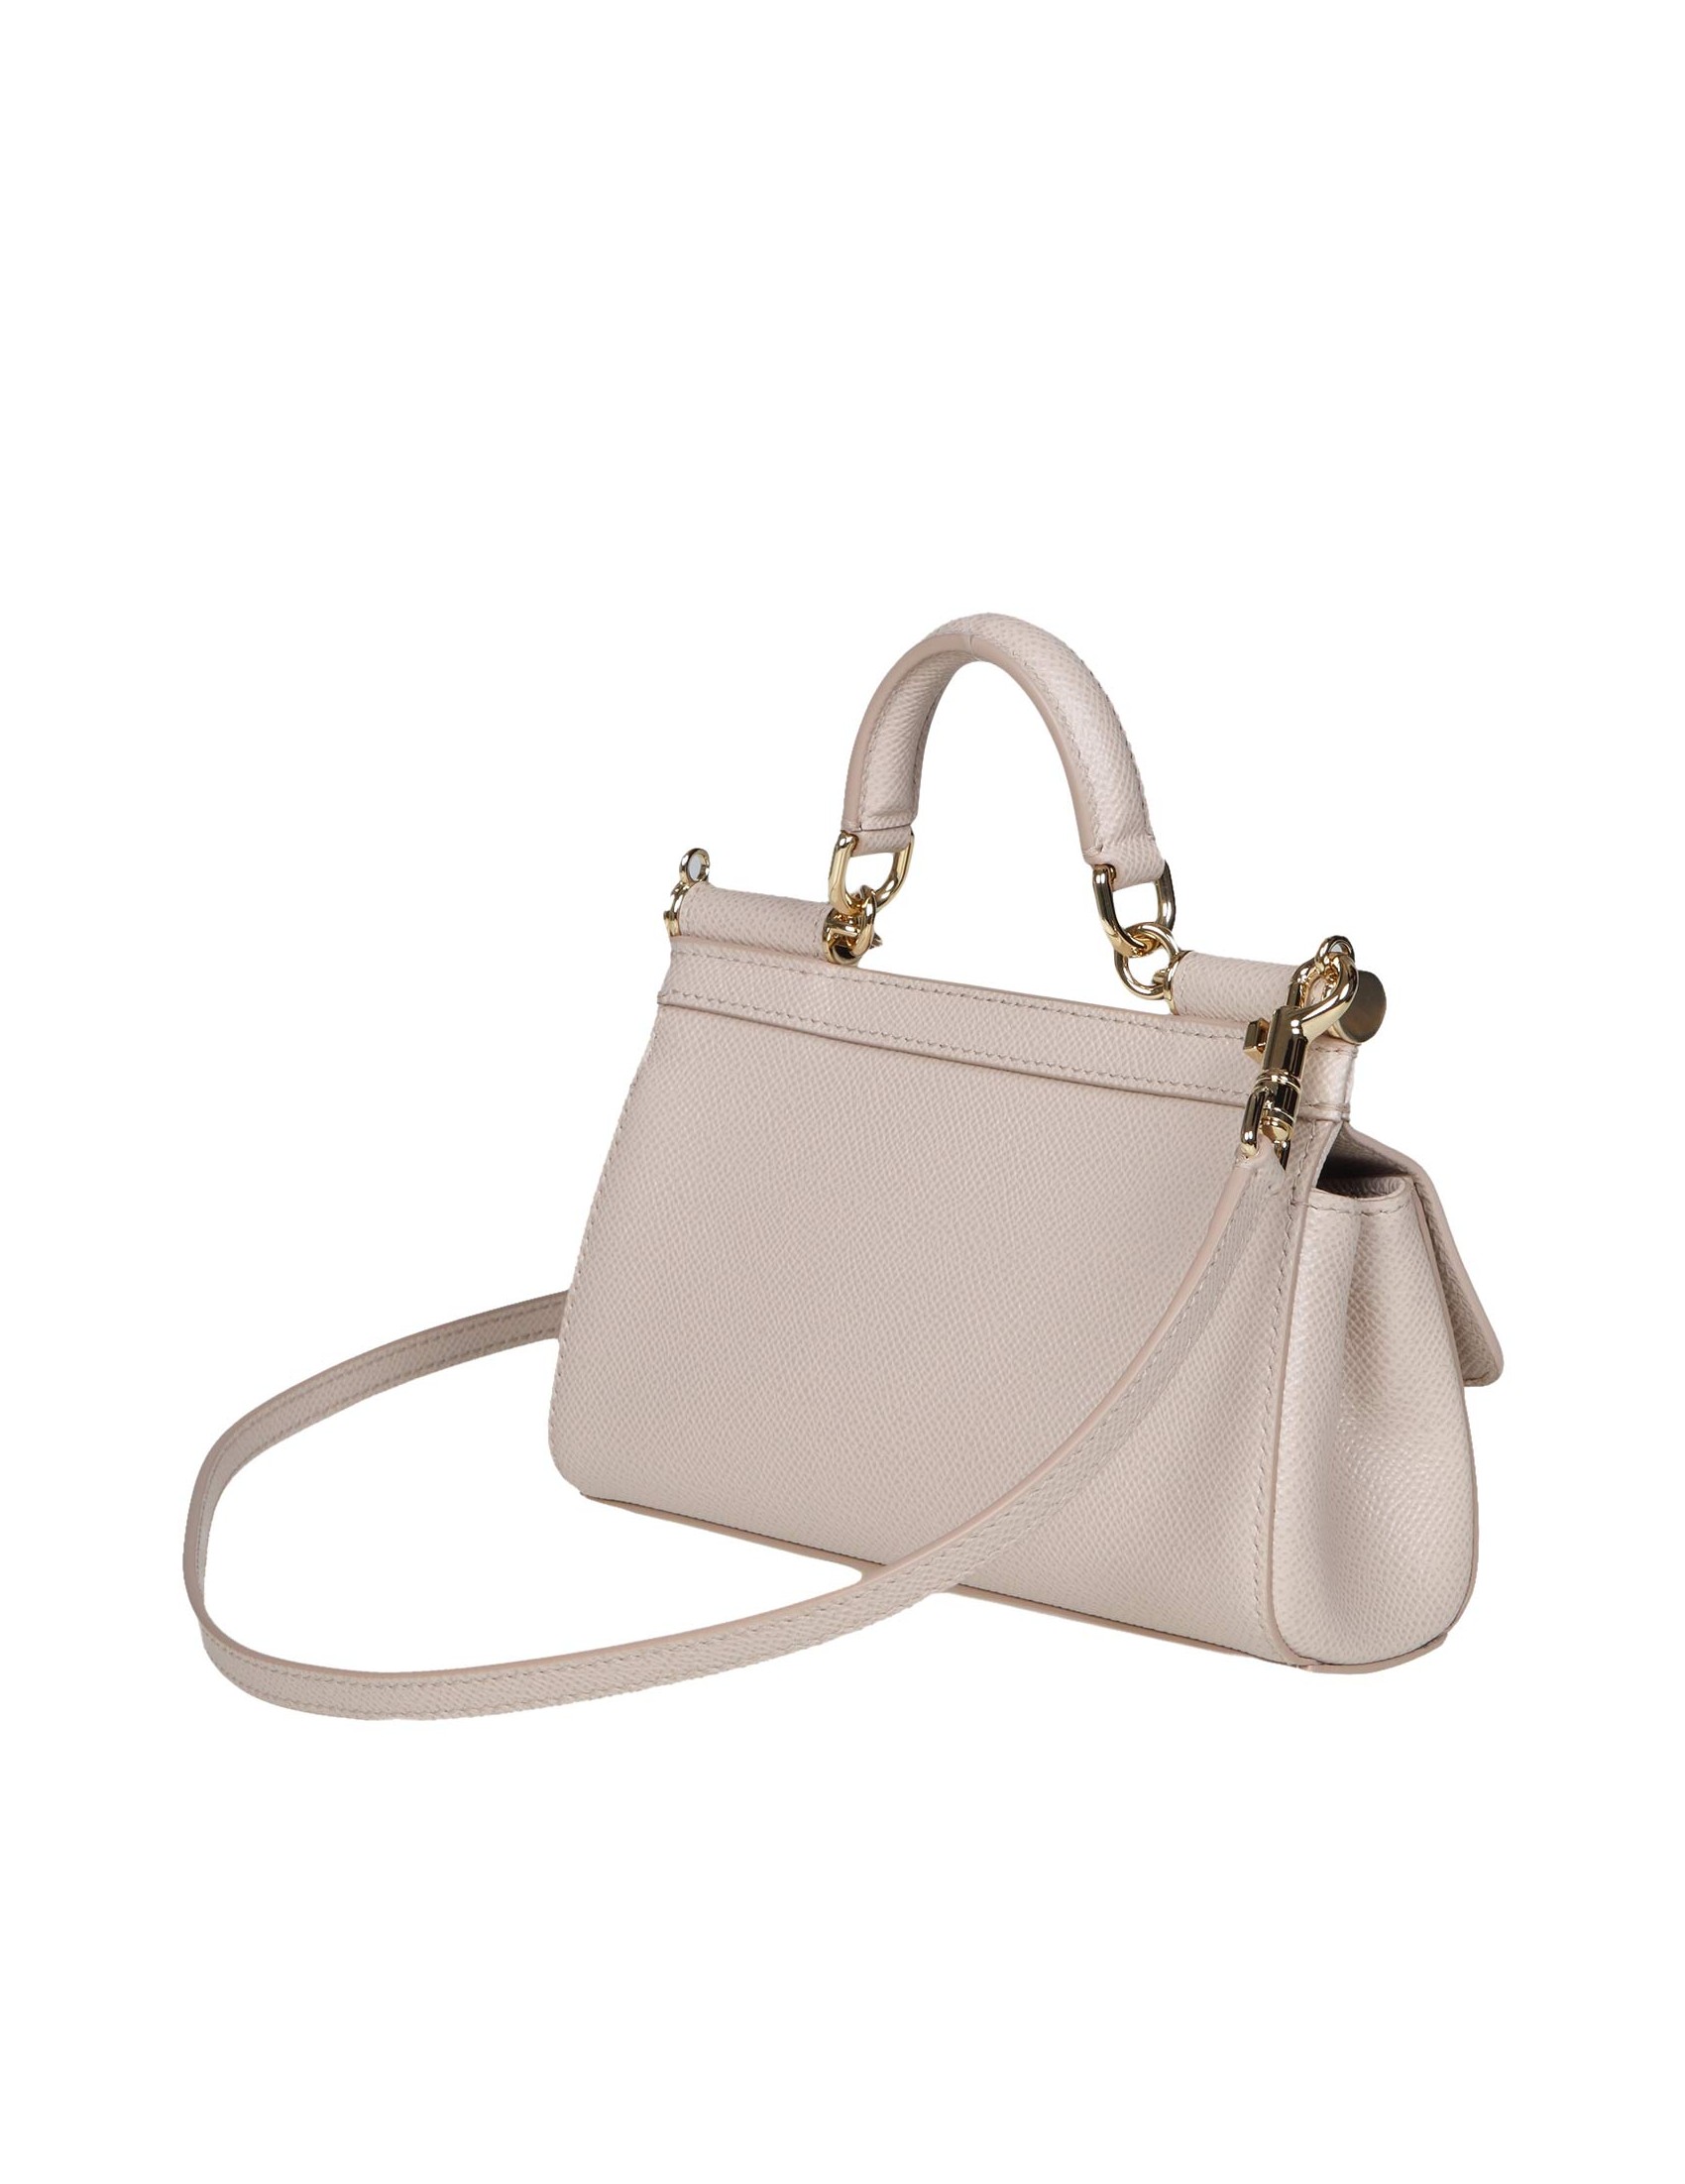 Small Sicily Bag In Dauphine Calfskin by Dolce & Gabbana at